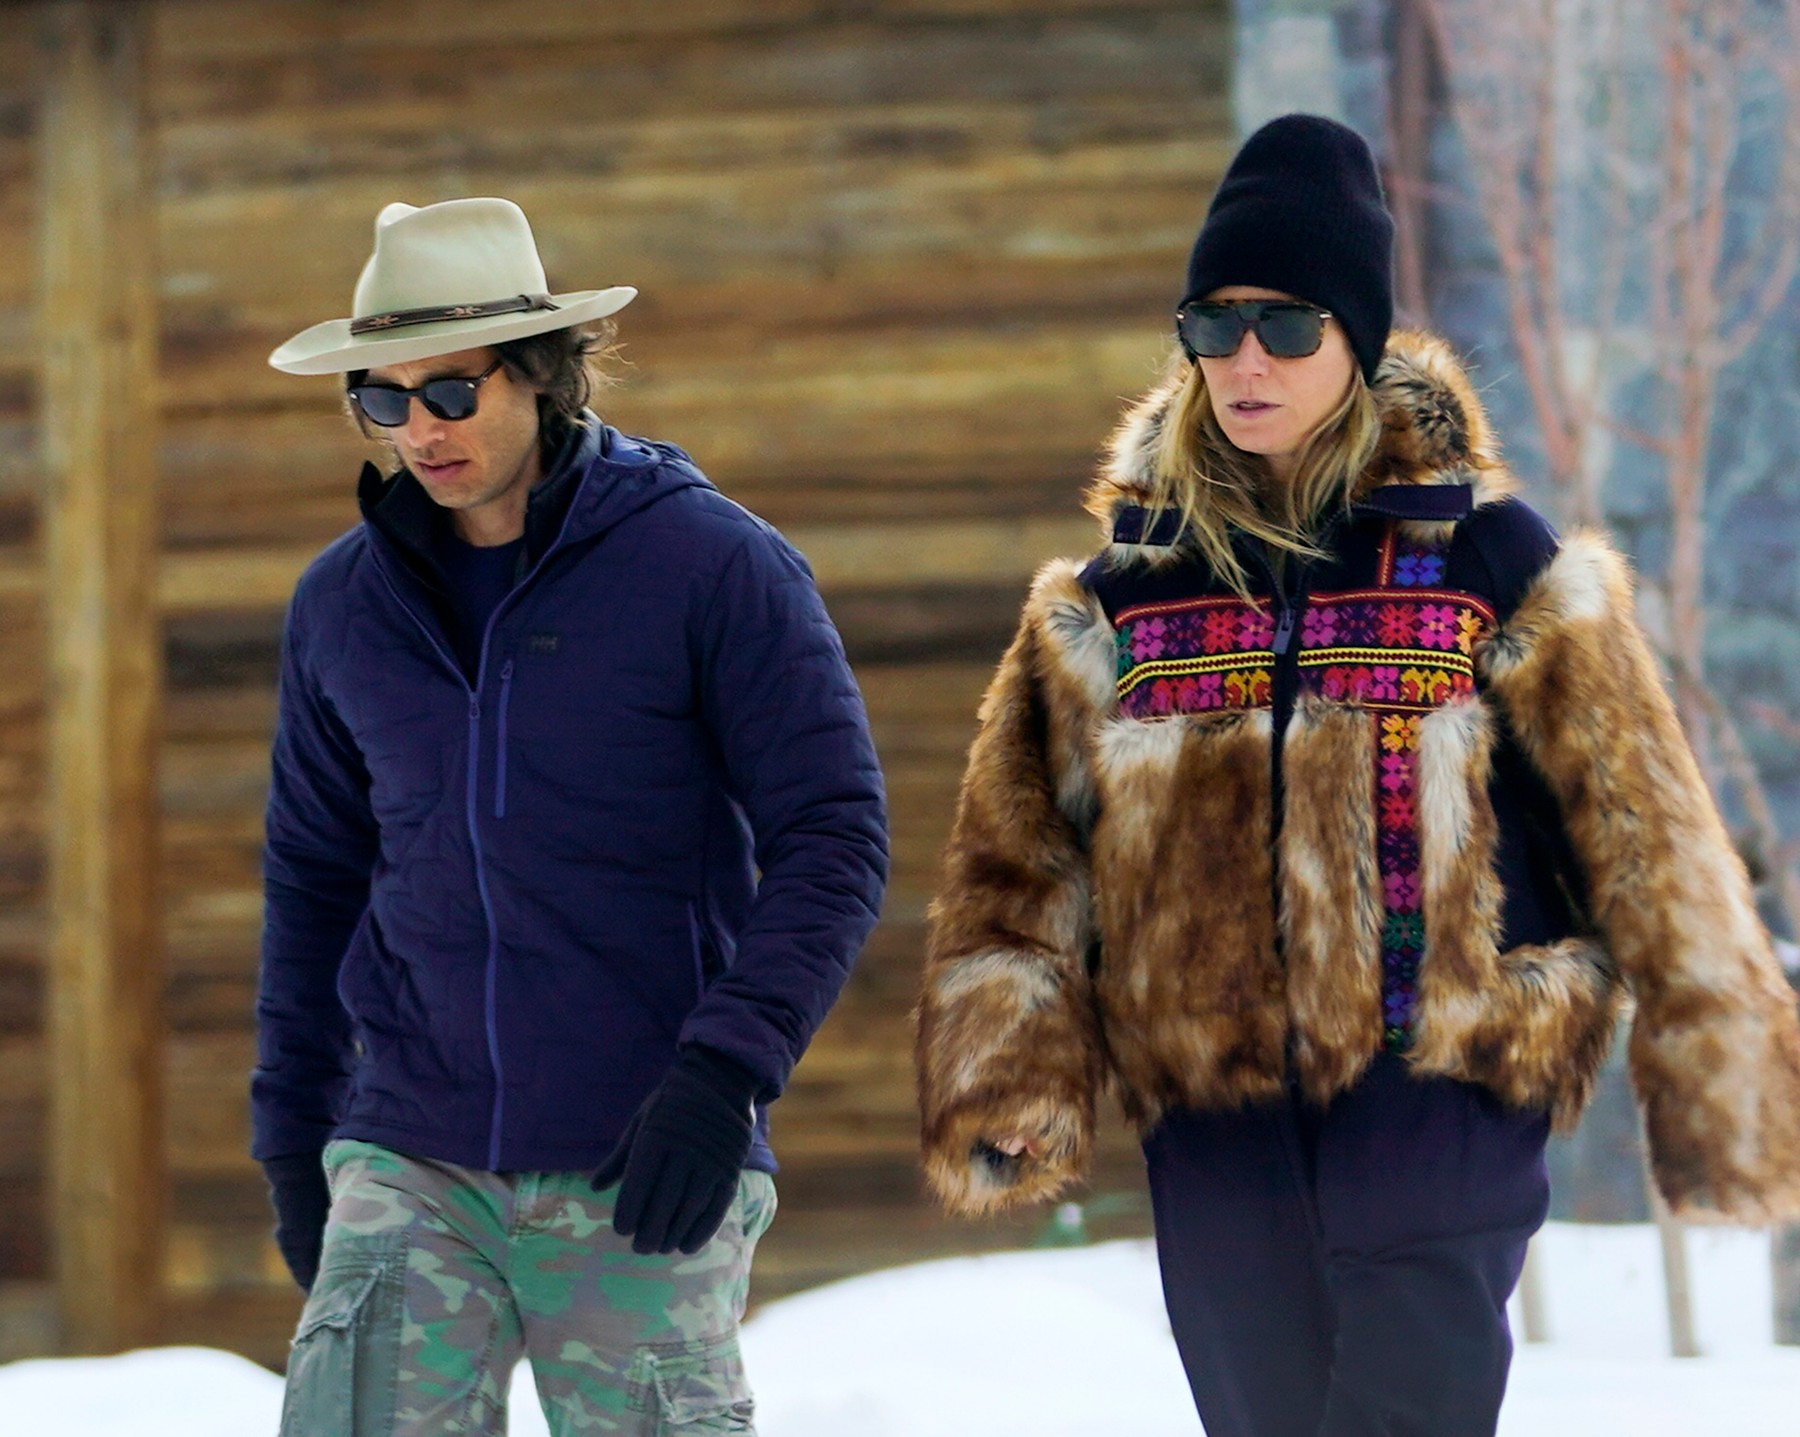 12/26/2019 Gwyneth Paltrow and Brad Falchuk take a walk in town in Aspen, Colorado. The 47 year old actress and businesswoman wore a black beanie, fur coat, black ski pants, and boots., Image: 489932731, License: Rights-managed, Restrictions: NO usage without agreed price and terms. Please contact sales@theimagedirect.com, Model Release: no, Credit line: TheImageDirect.com / The Image Direct / Profimedia